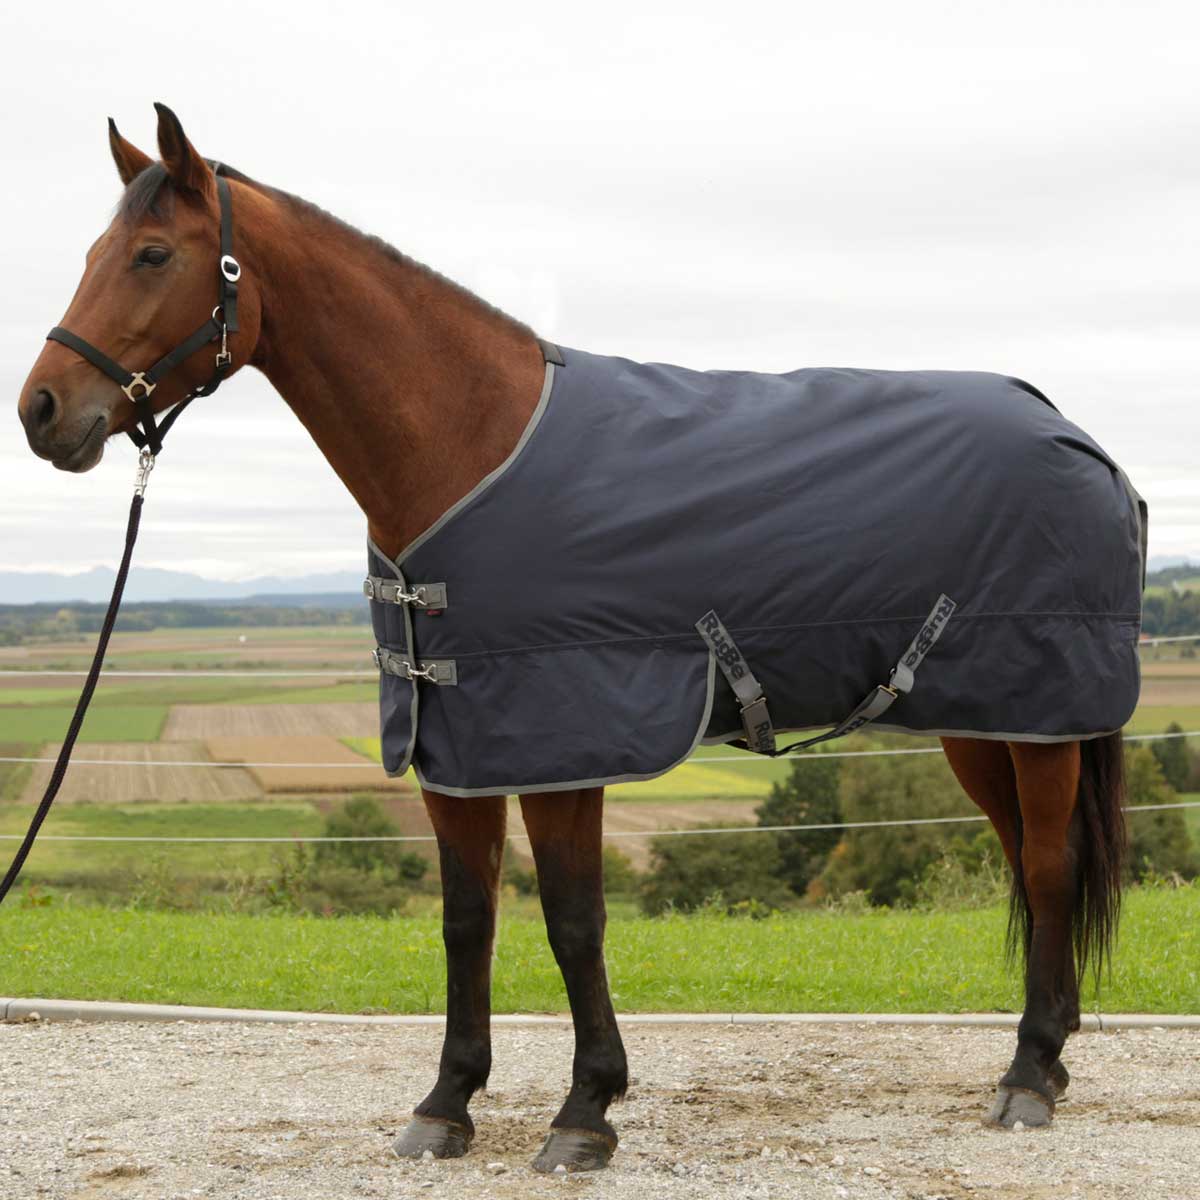 Covalliero Winter Blanket RugBe IceProtect navy 600D, 300g 125